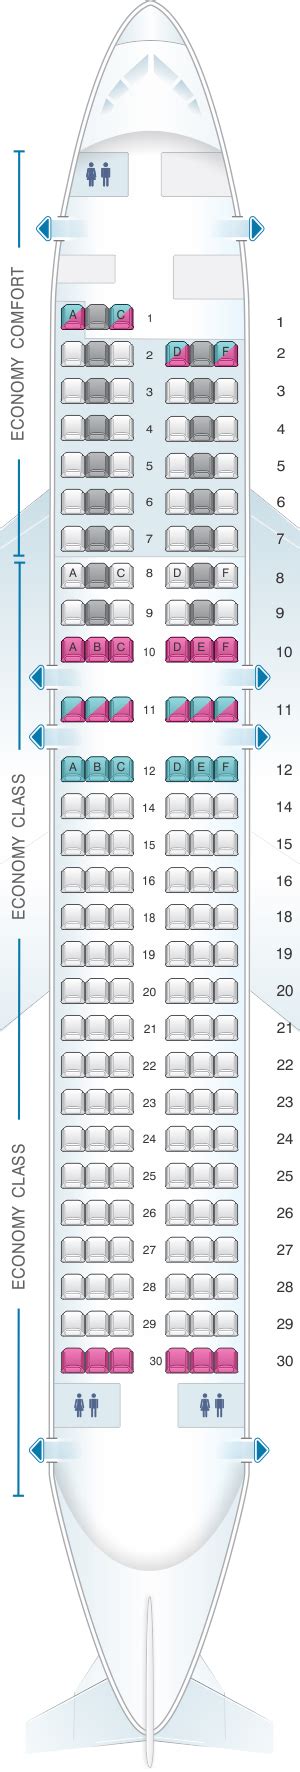 Airbus A320 Seating Chart Gallery Of Chart 2019